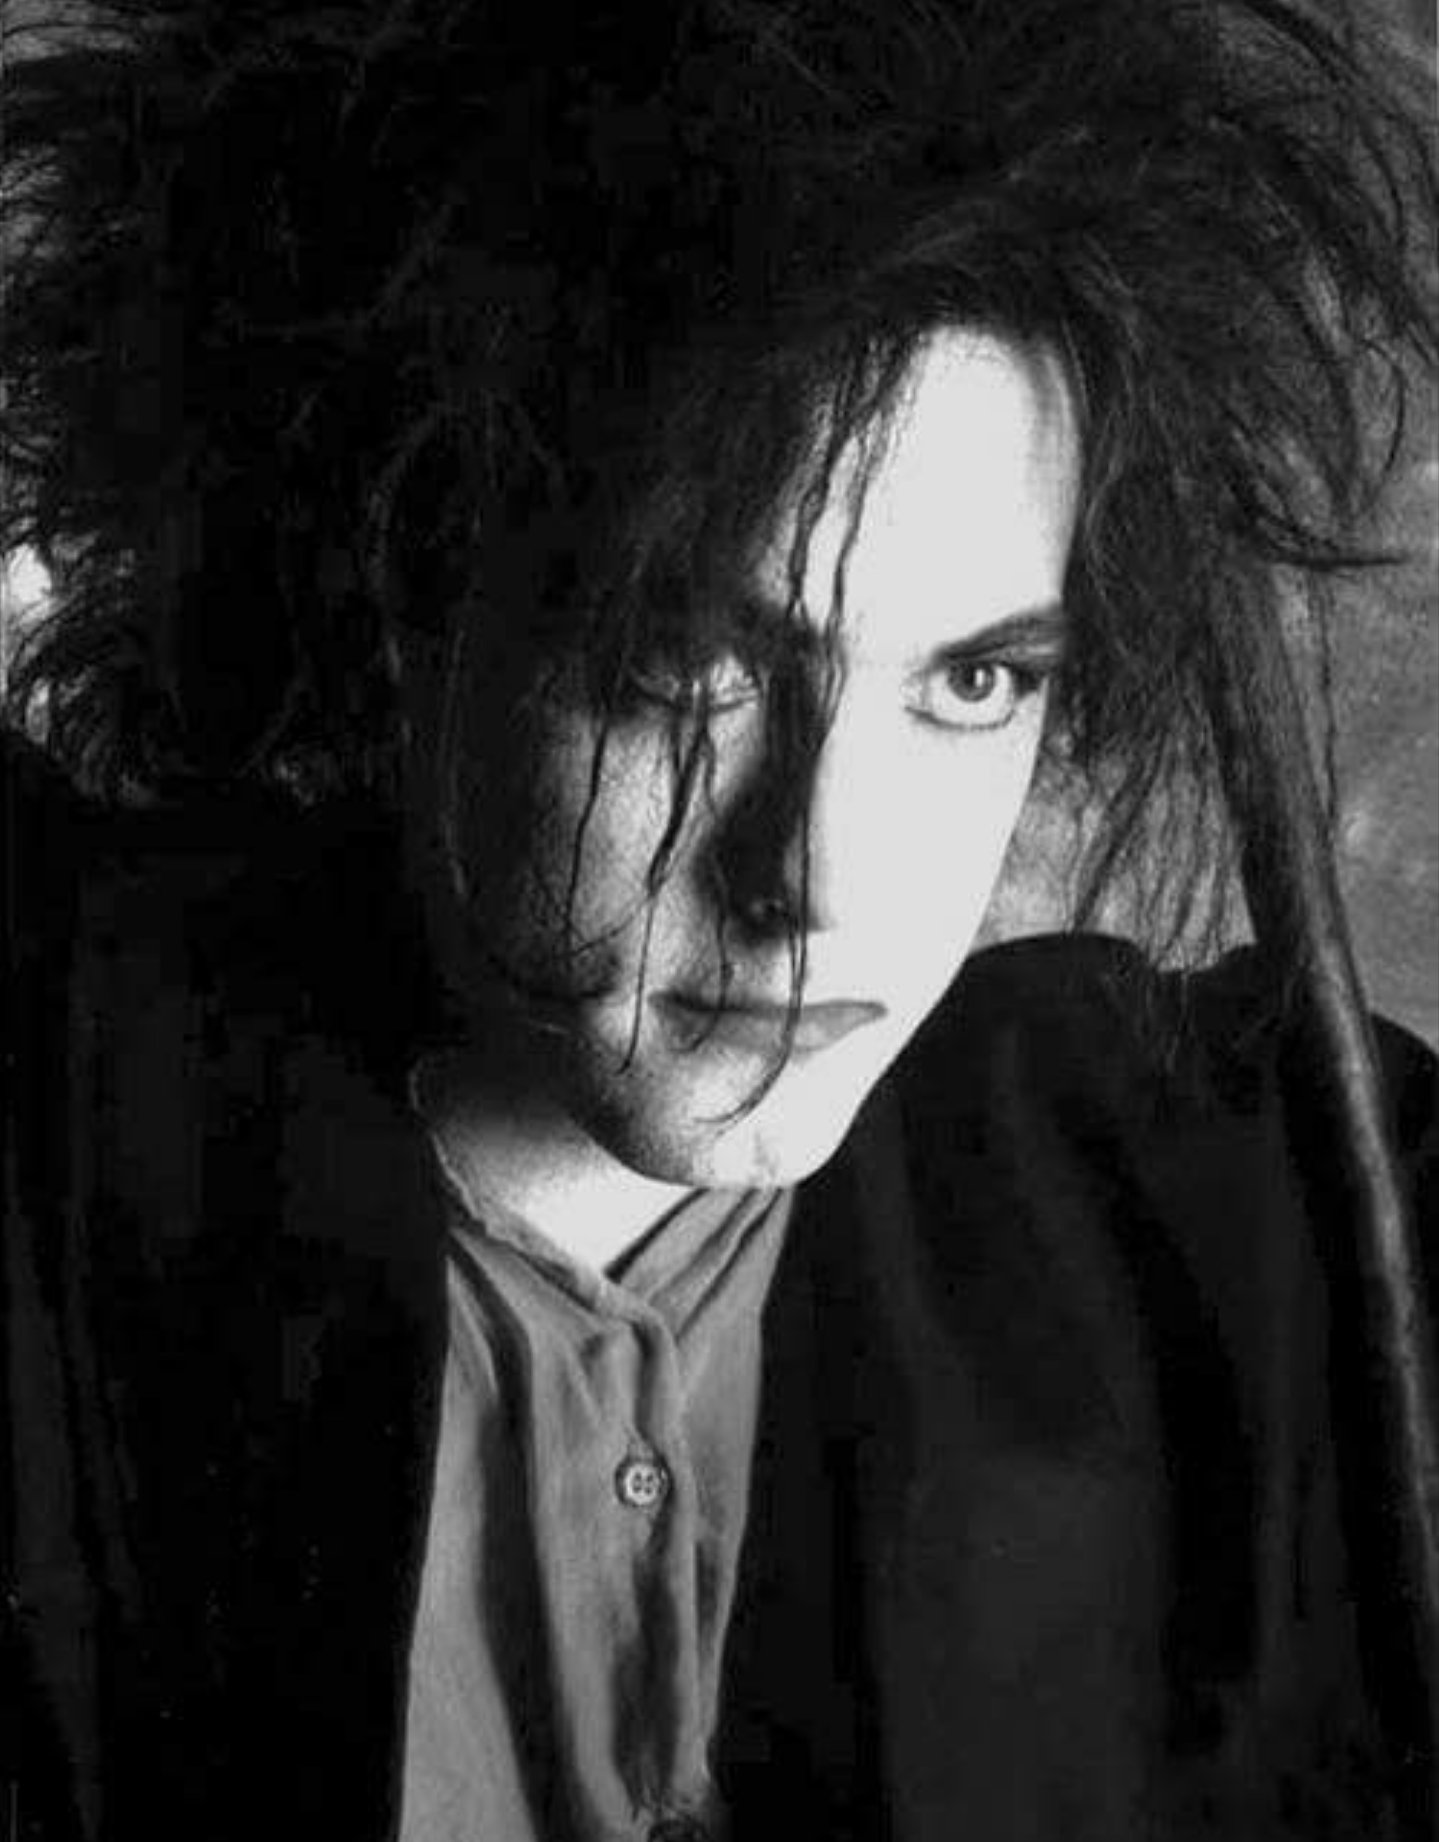 Happy birthday to the one and only Mr. Robert Smith!! 